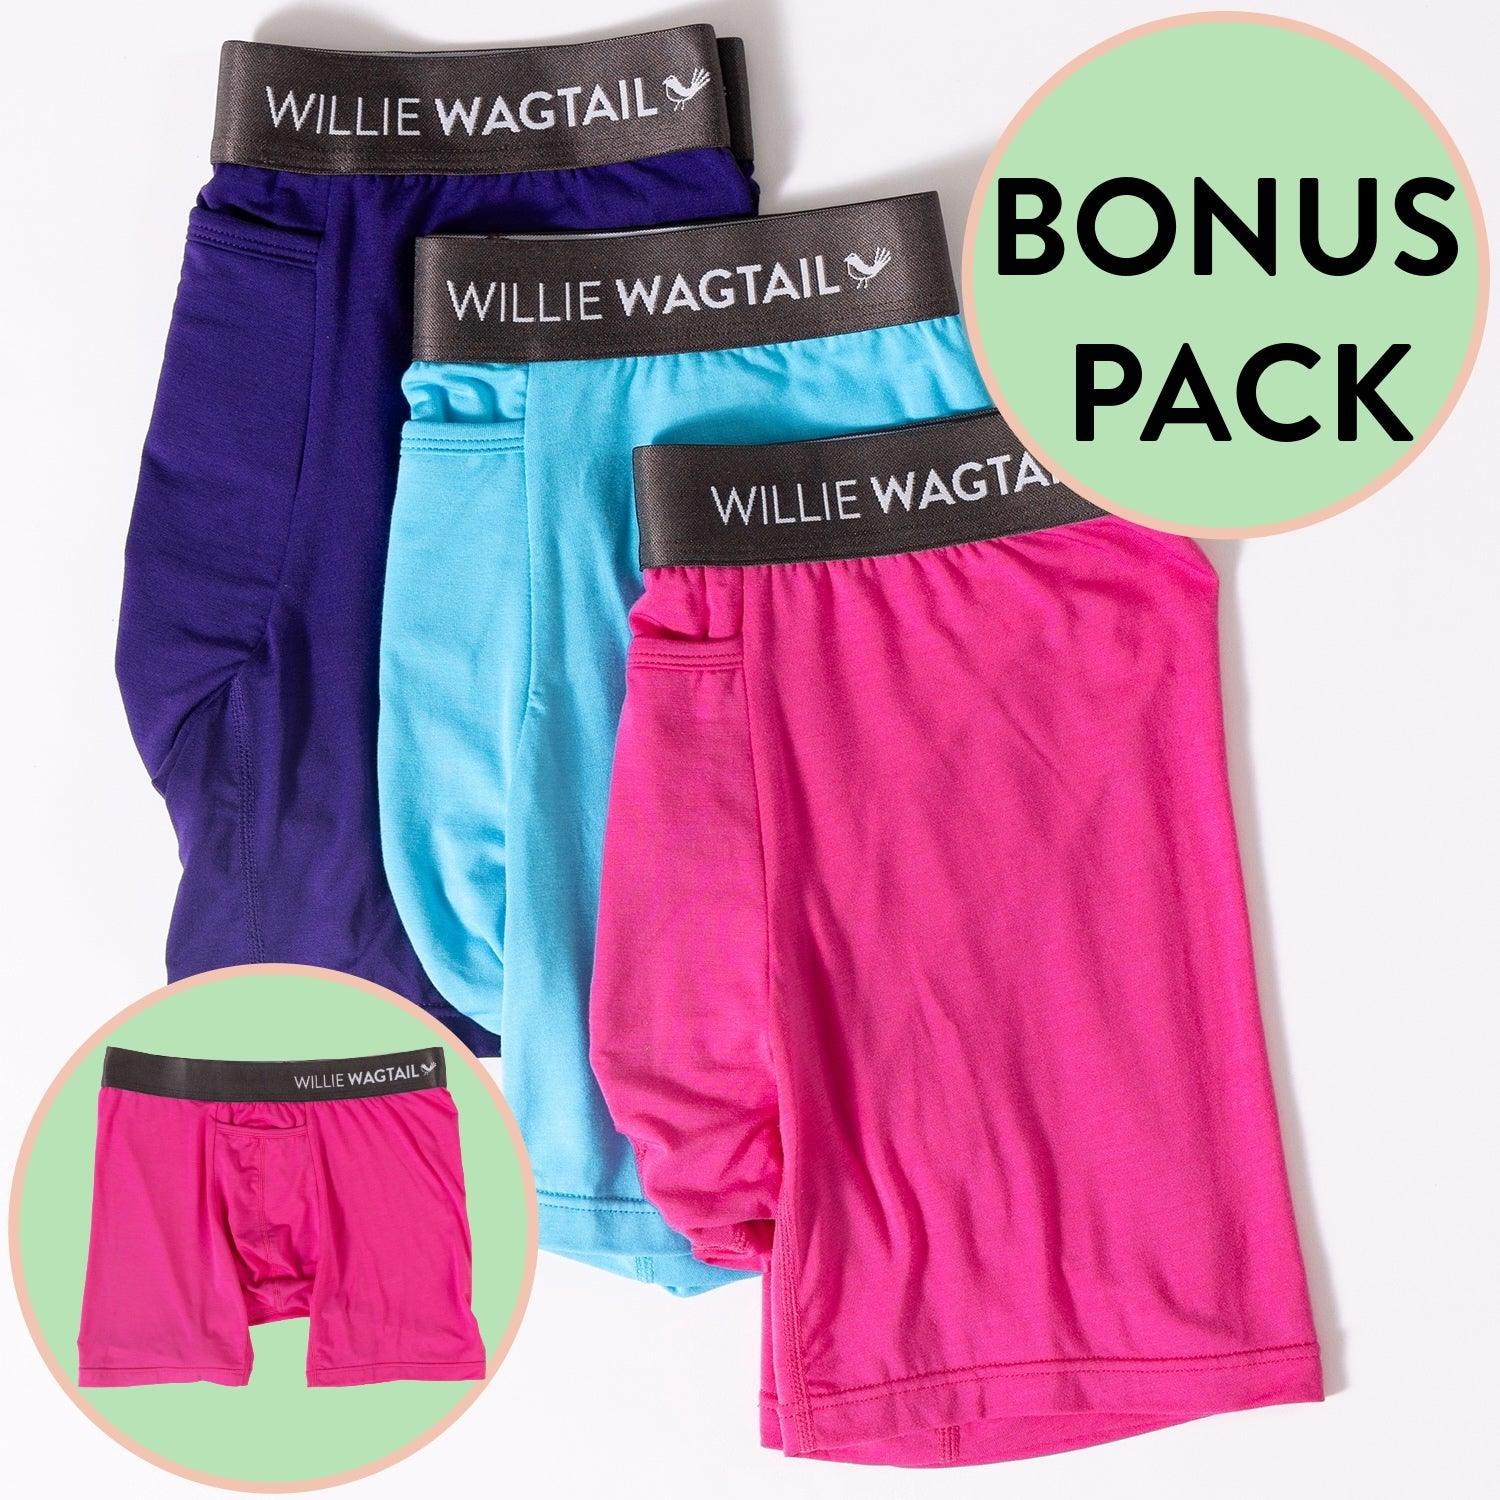 Party Pack (BONUS 4-PACK) - Willie Wagtail